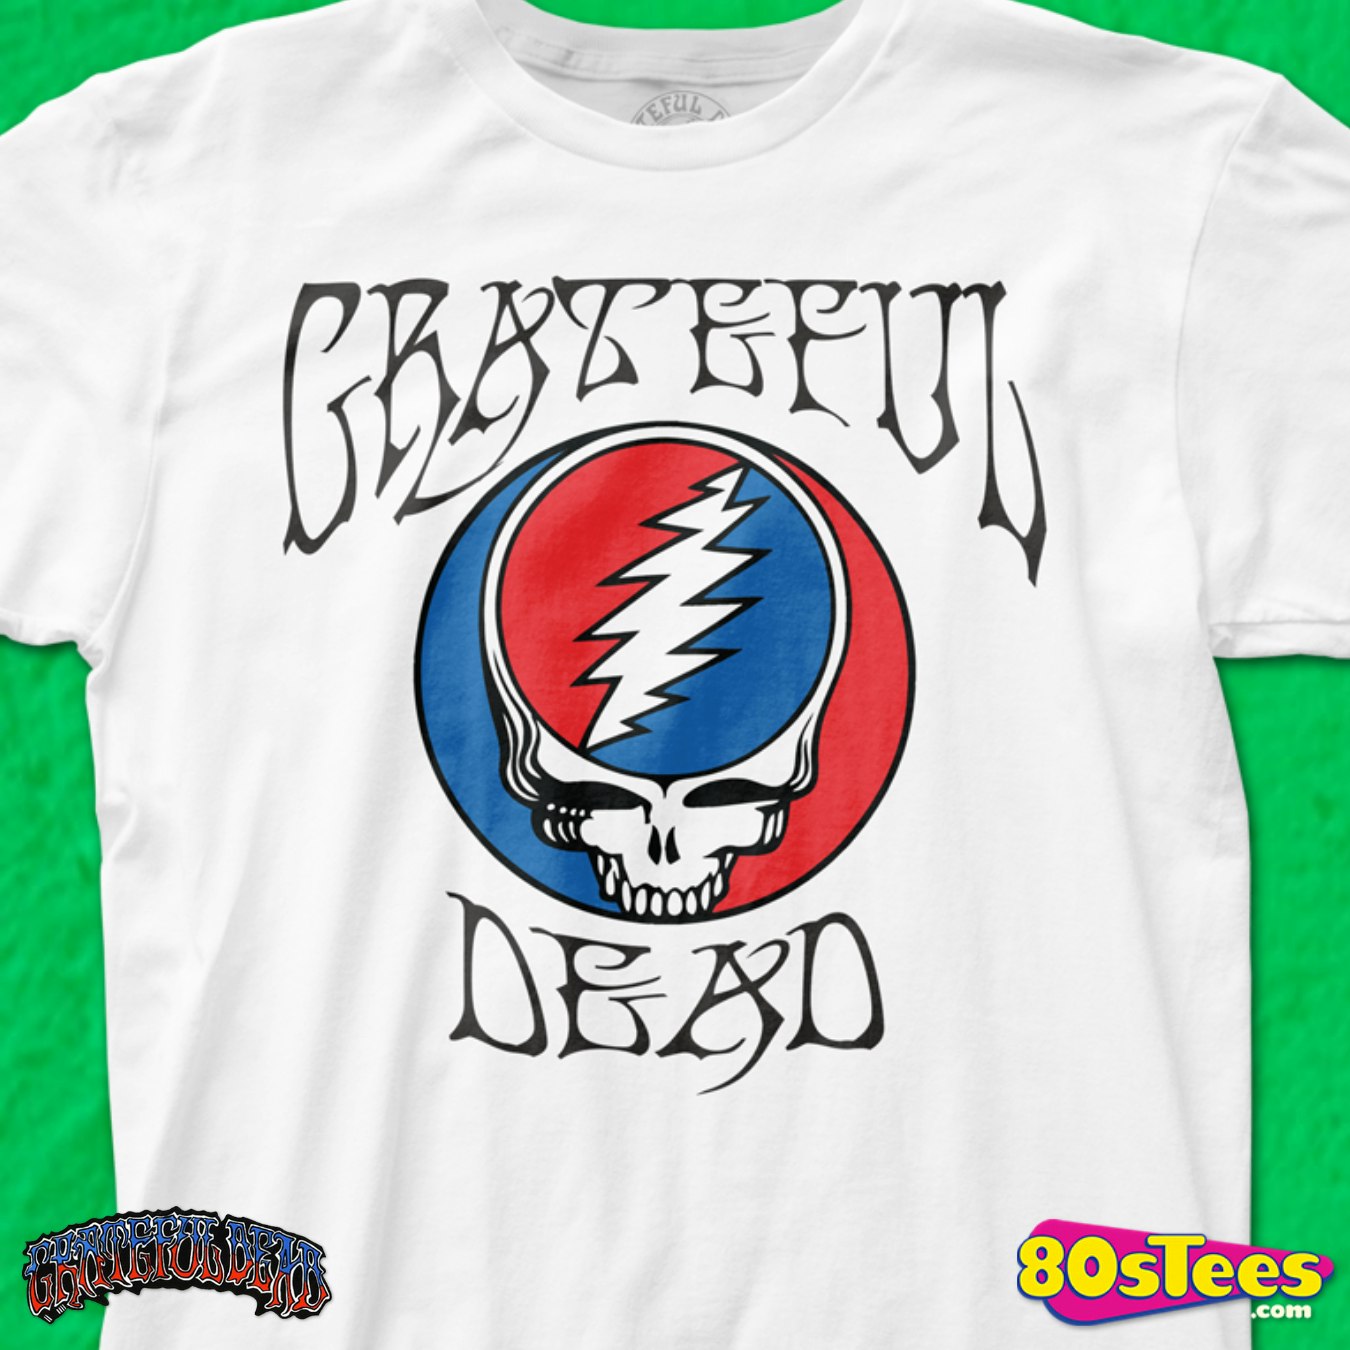 Grateful Dead & Company lot Dark Star T-shirt Steal Your Face Wars Style 